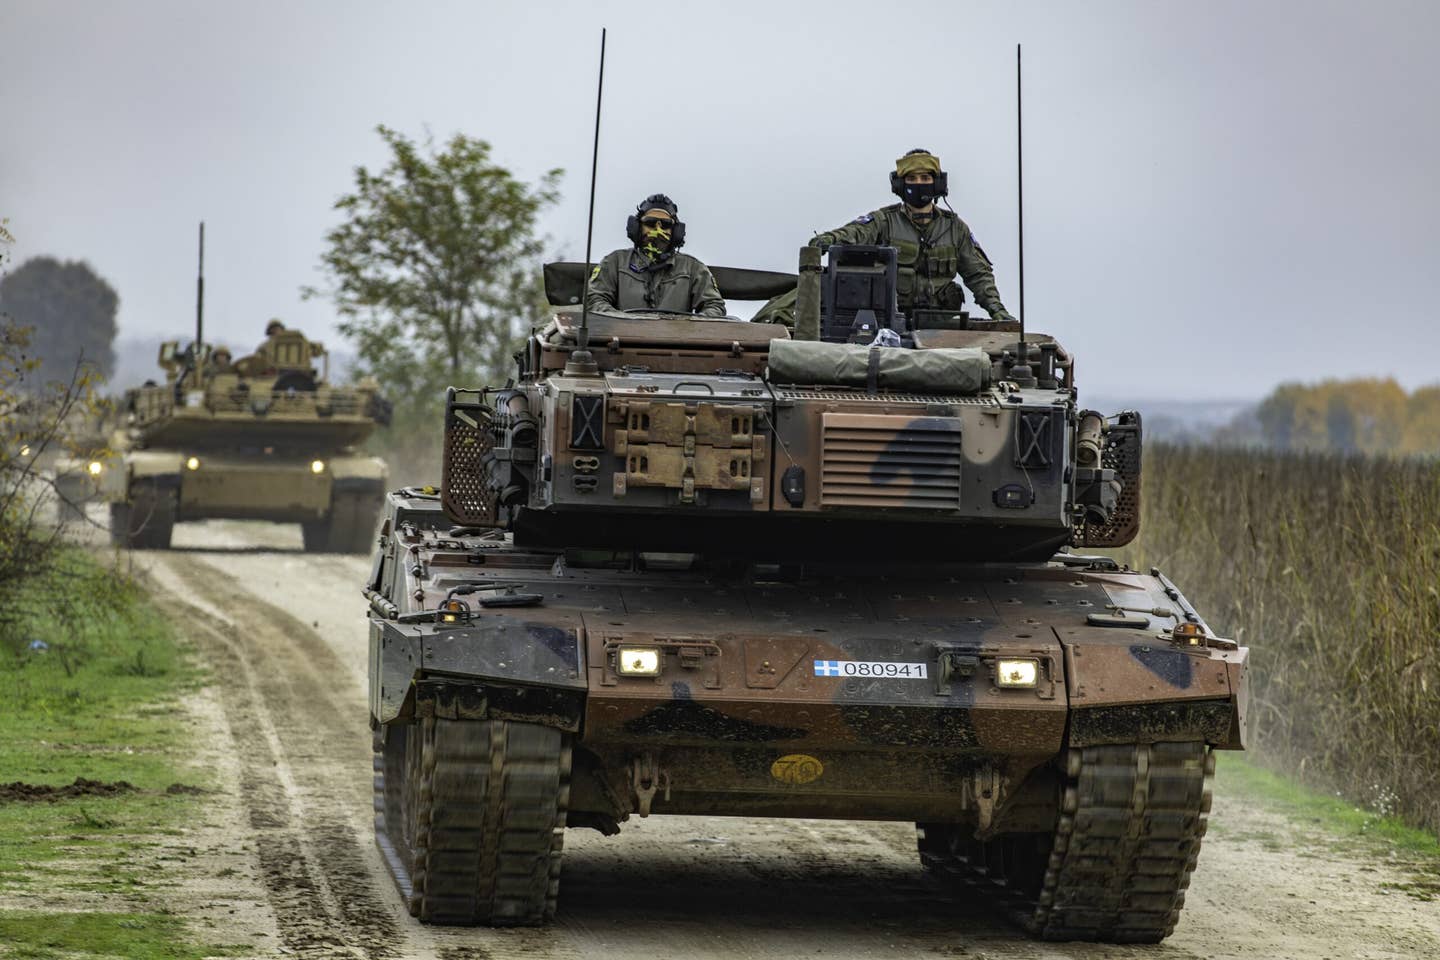 Hellenic Army soldiers lead the way in a Leopard 2 tank as a U.S. Army M1 Abrams tank follows behind as part of Exercise Olympic Cooperation 2021 in Xanthi, Greece. <em>U.S. Army/Cpl. Max Elliott</em><a href="https://api.army.mil/e2/c/images/2021/11/23/62ea5333/original.jpg" target="_blank" rel="noreferrer noopener"></a>